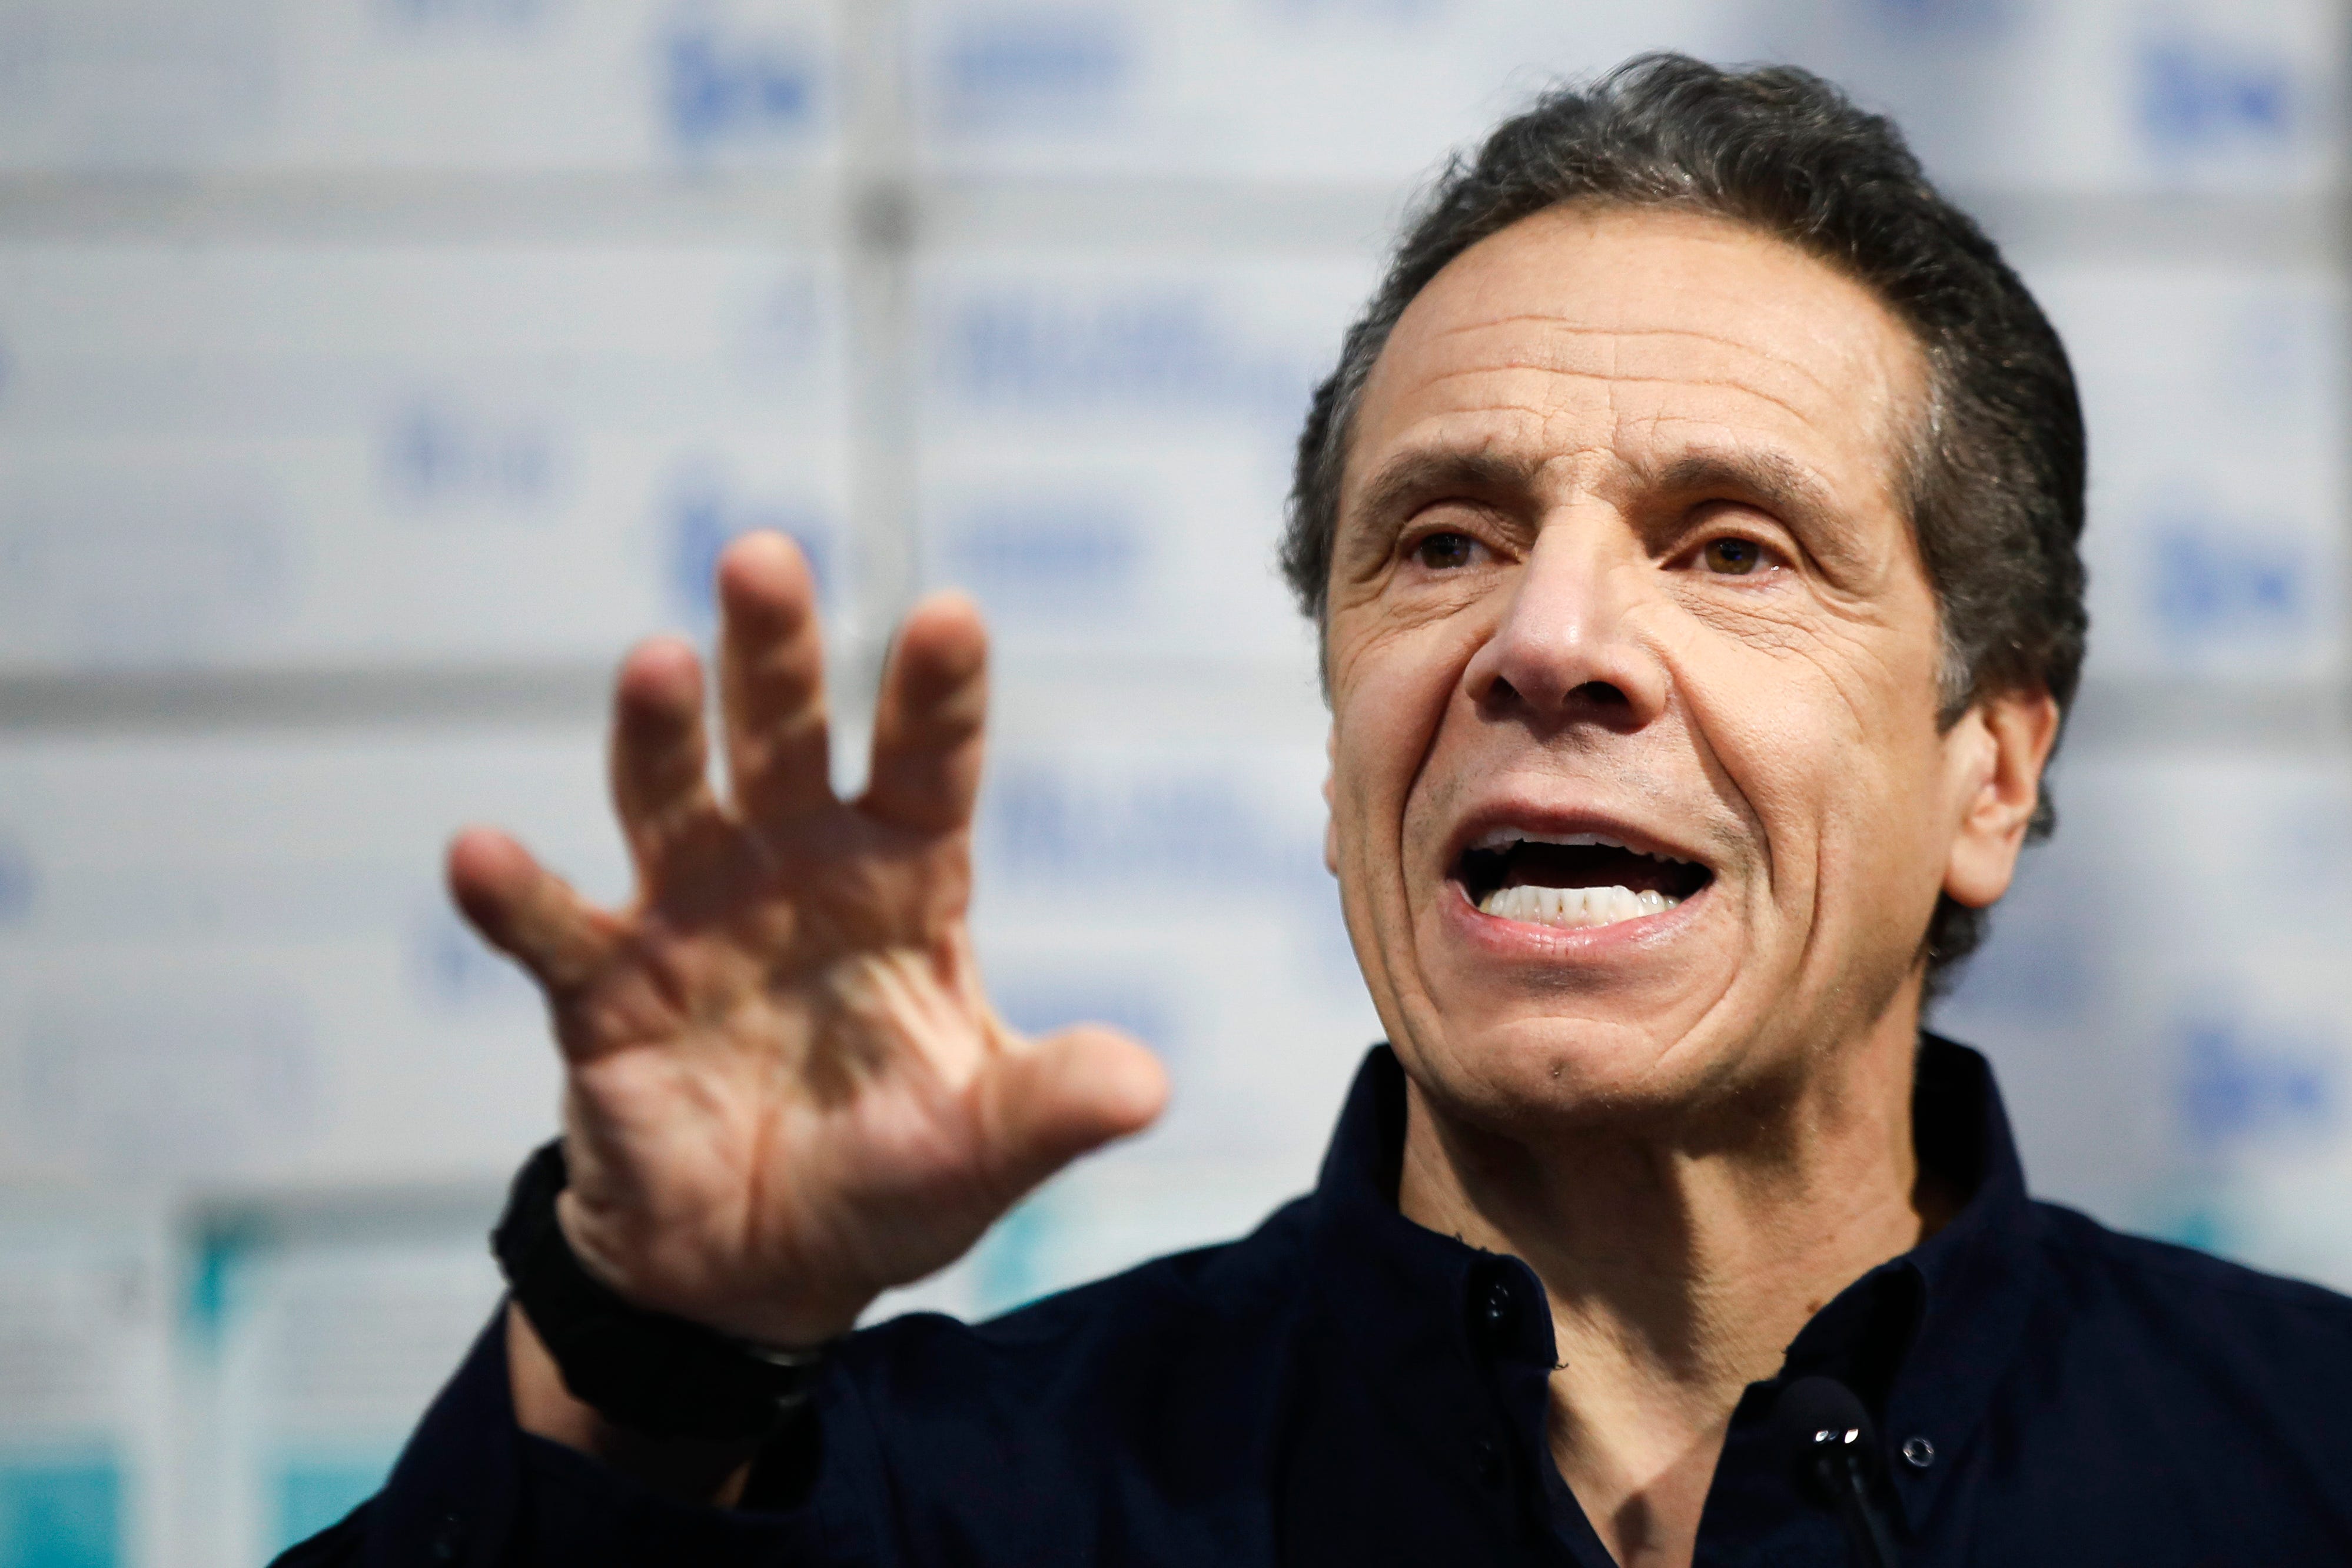 Woman says Cuomo asked to kiss her at a wedding; harassment accuser also rips his apology